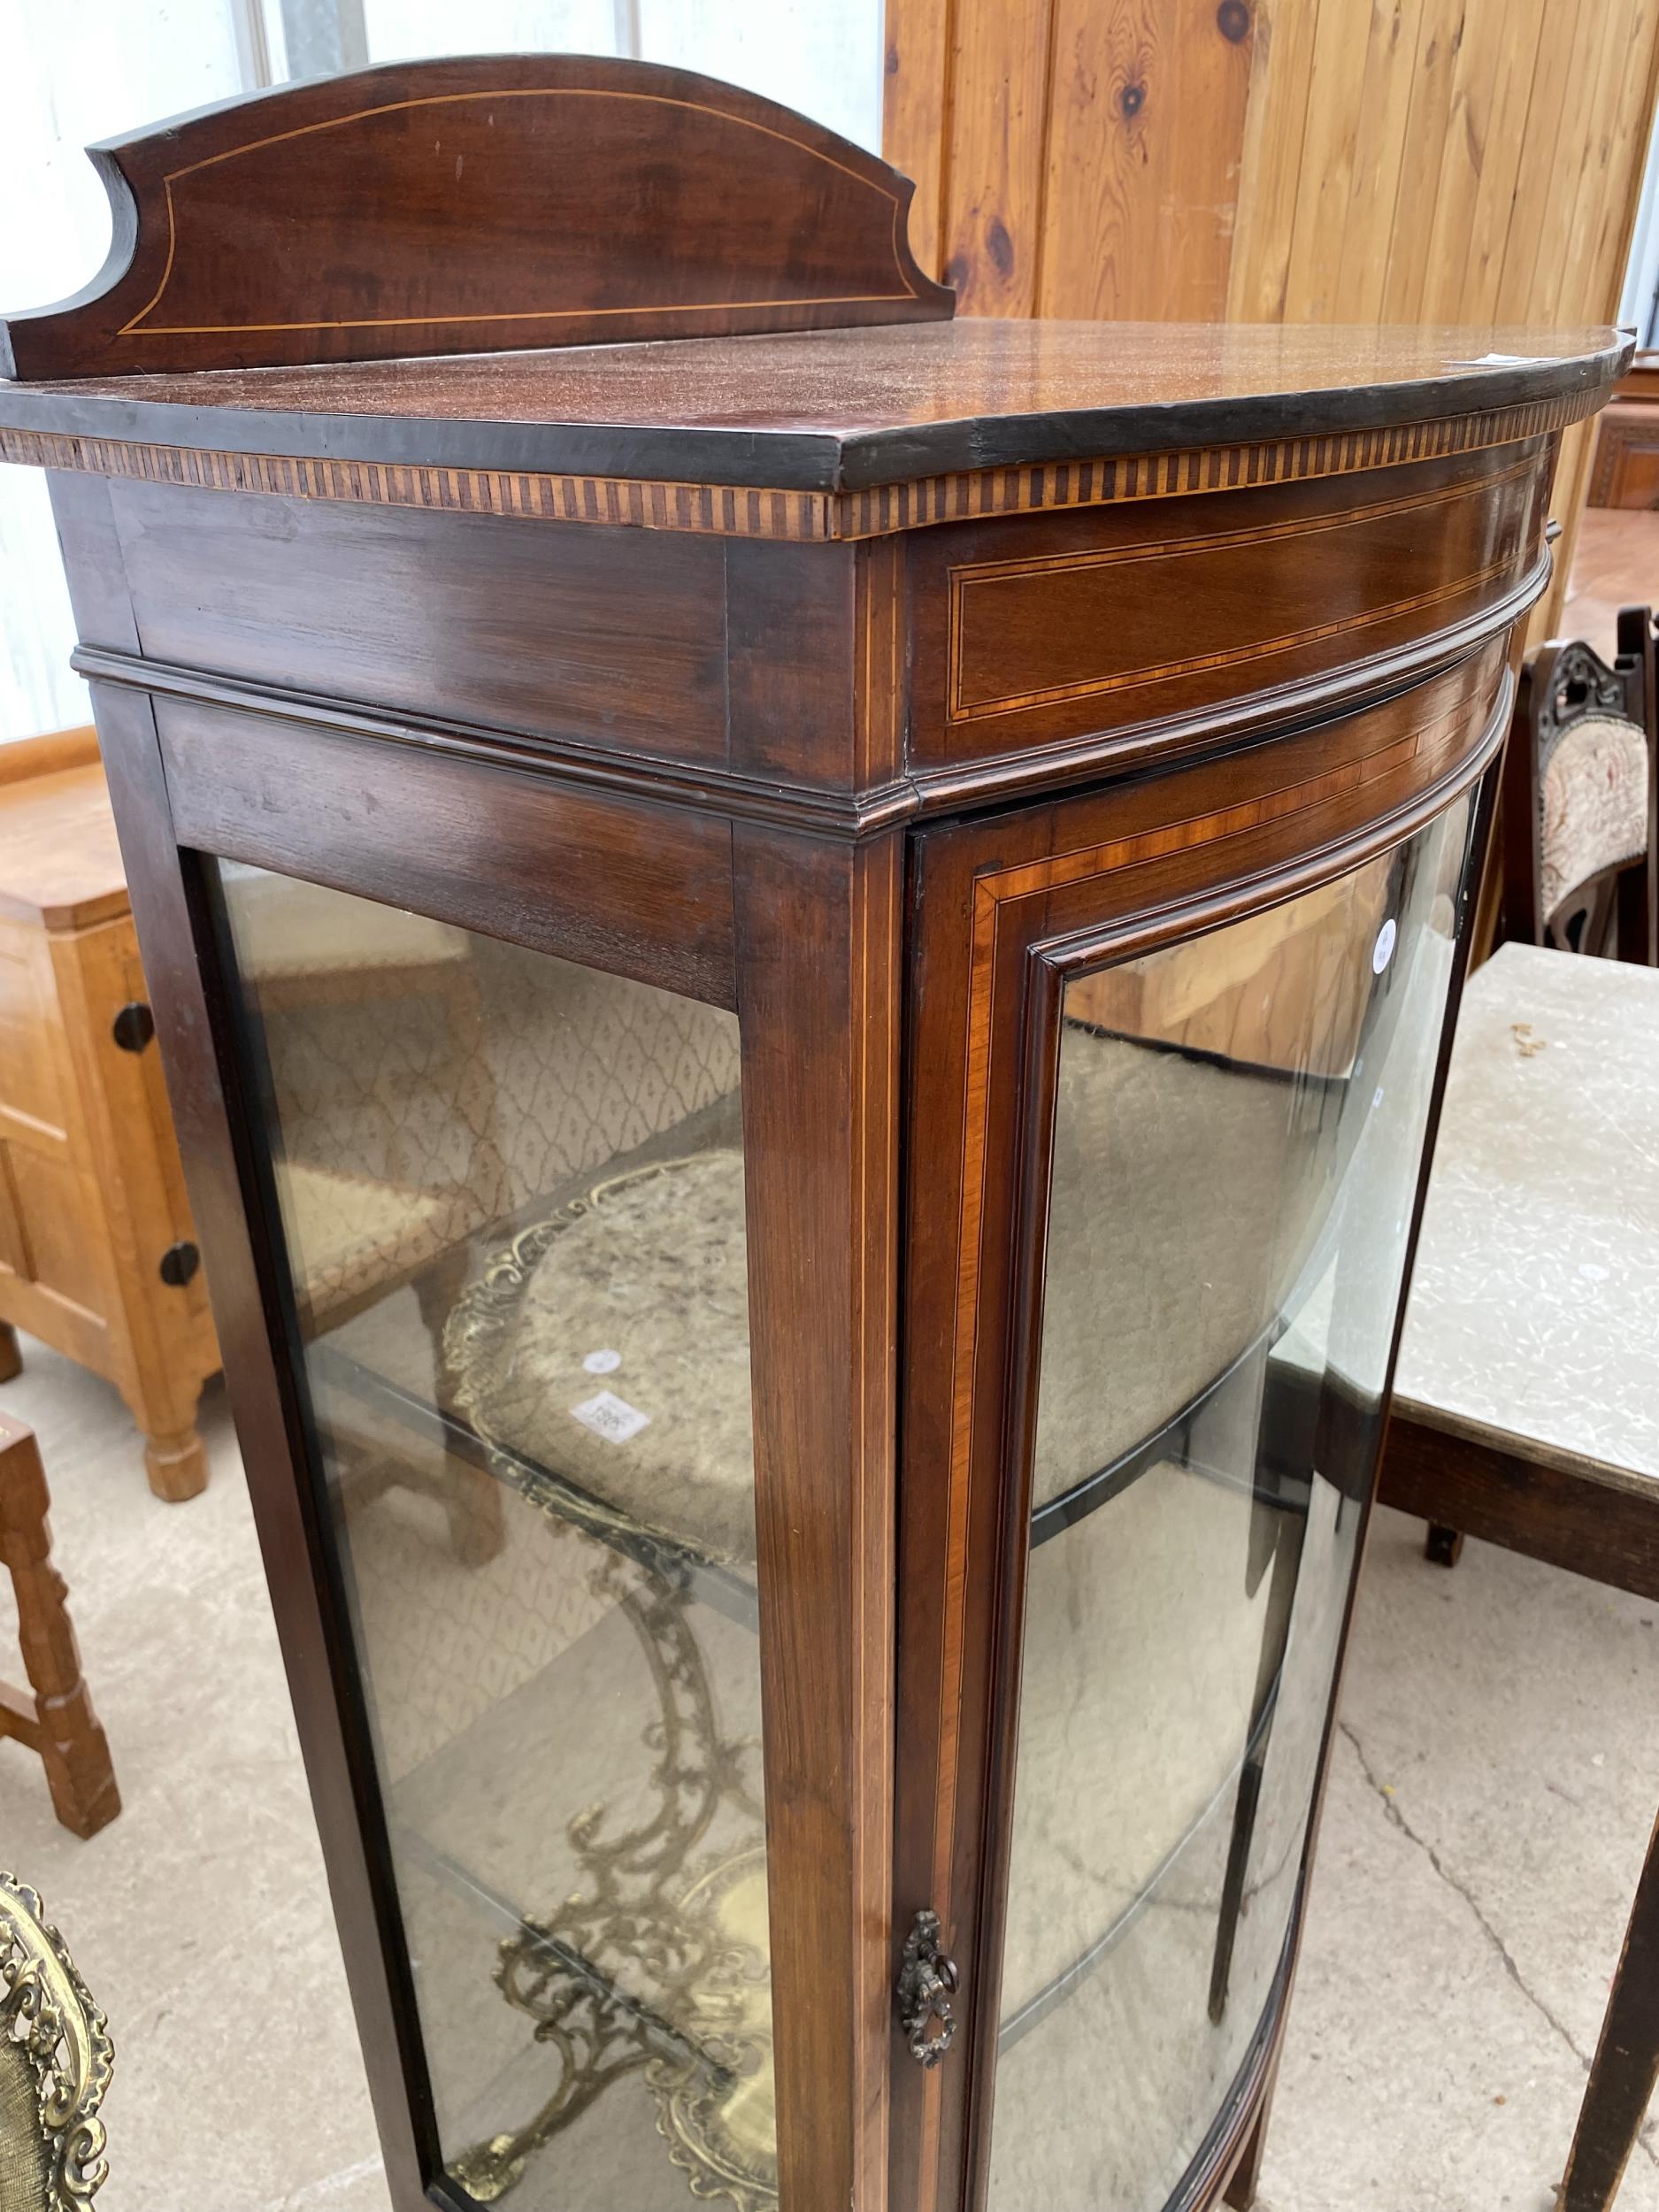 AN EDWARDIAN MAHOGANY AND INLAID BOWFRONTED DISPLAY CABINET, 23" WIDE - Image 3 of 7